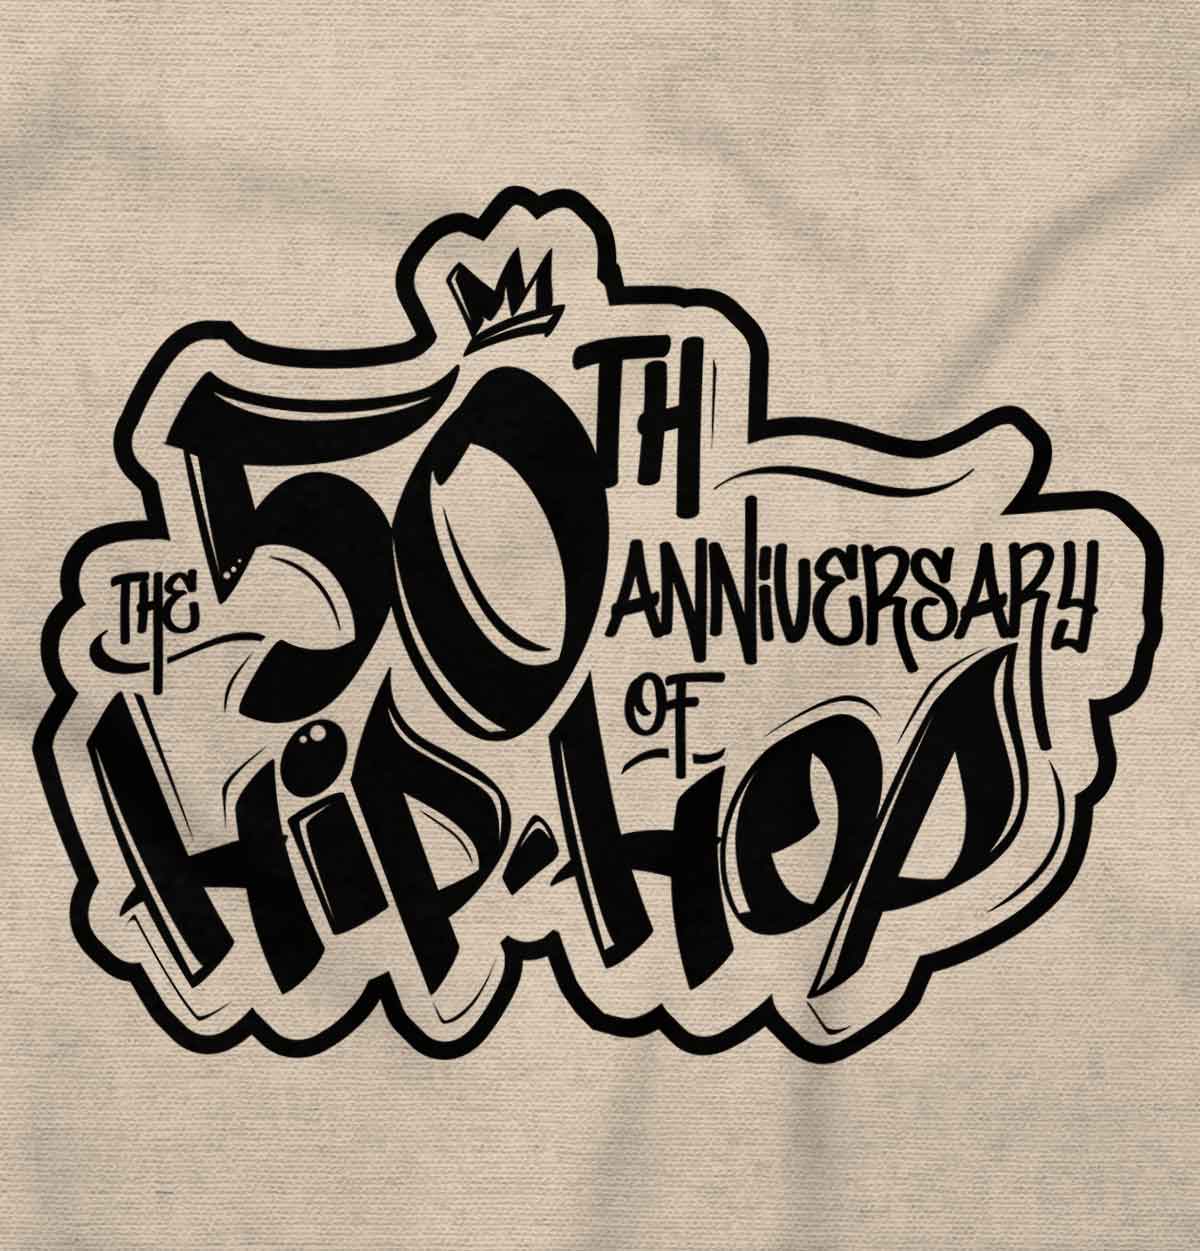 This image shows a sweatshirt that honors the birthplace of Hip Hop and the iconic moment when DJ Kool Herc brought music to life in 1973, allowing you to celebrate and proudly wear a piece of history.